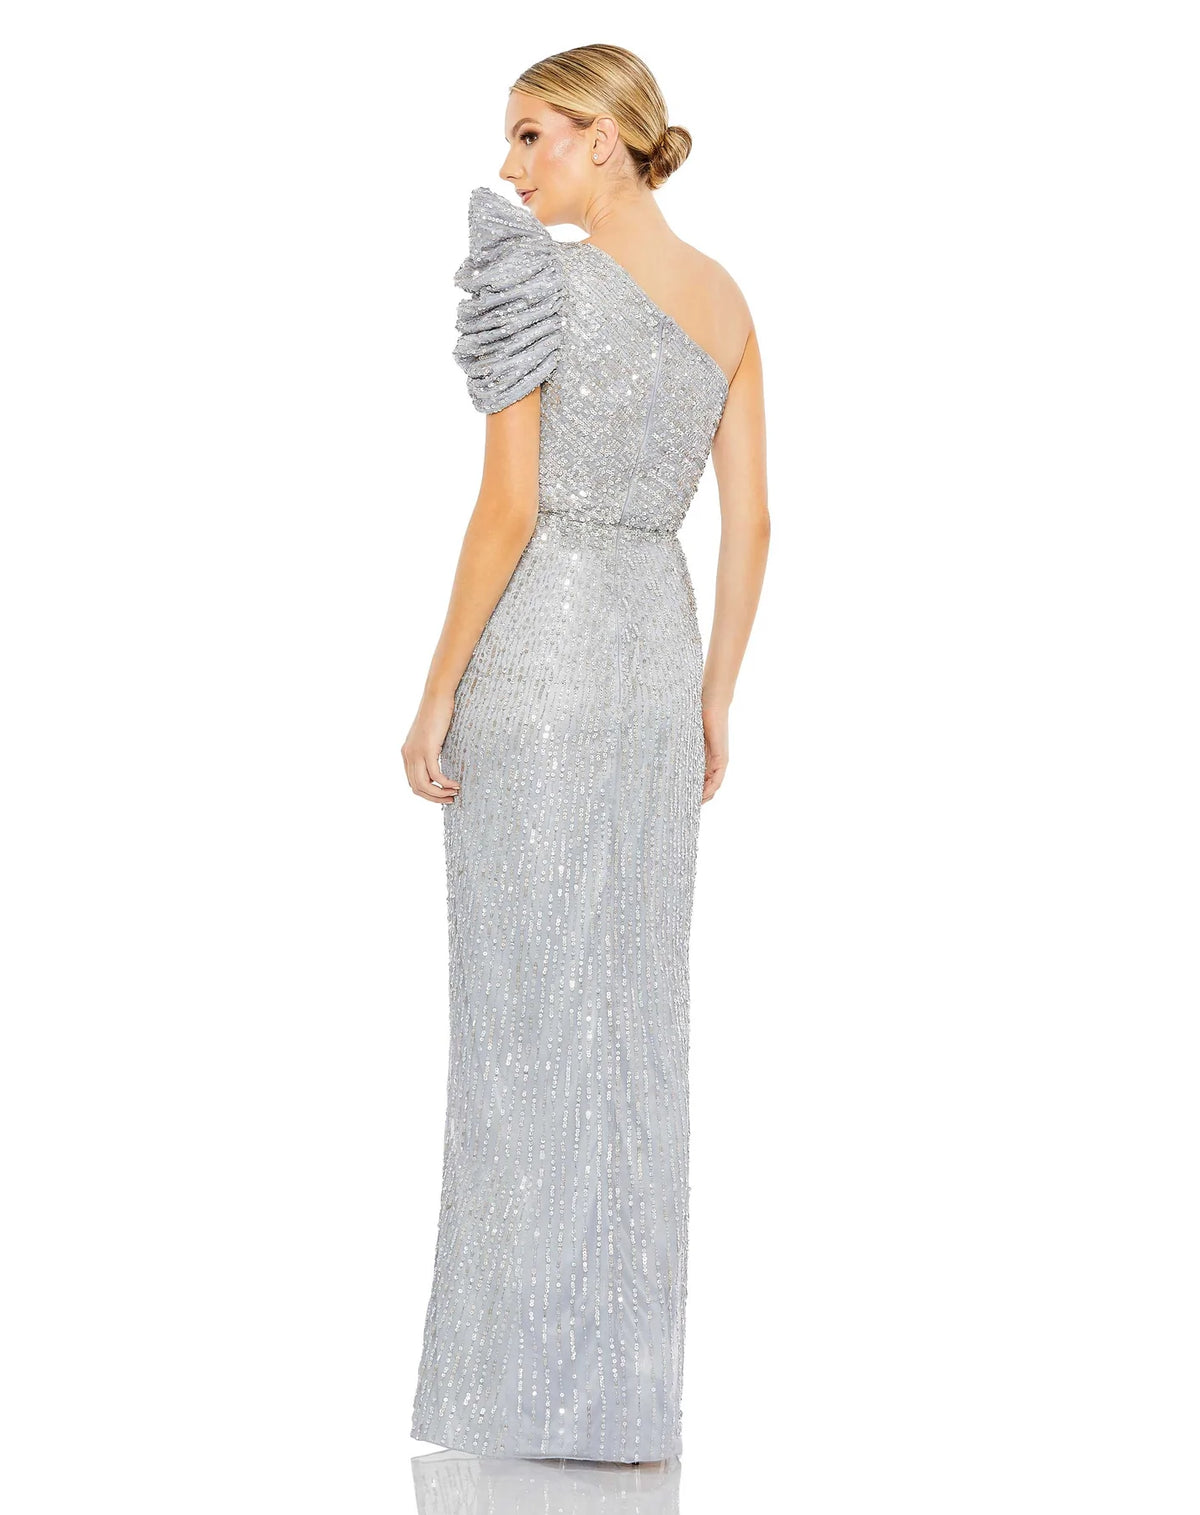 vThis beautiful silver sequin, one-shoulder, asymmetric floor-length, evening gown with a beautiful cinched waist and puff detail on the shoulder is an elegant gown for special occasions and events with one thigh high split and an elegant form-fitting fit back view